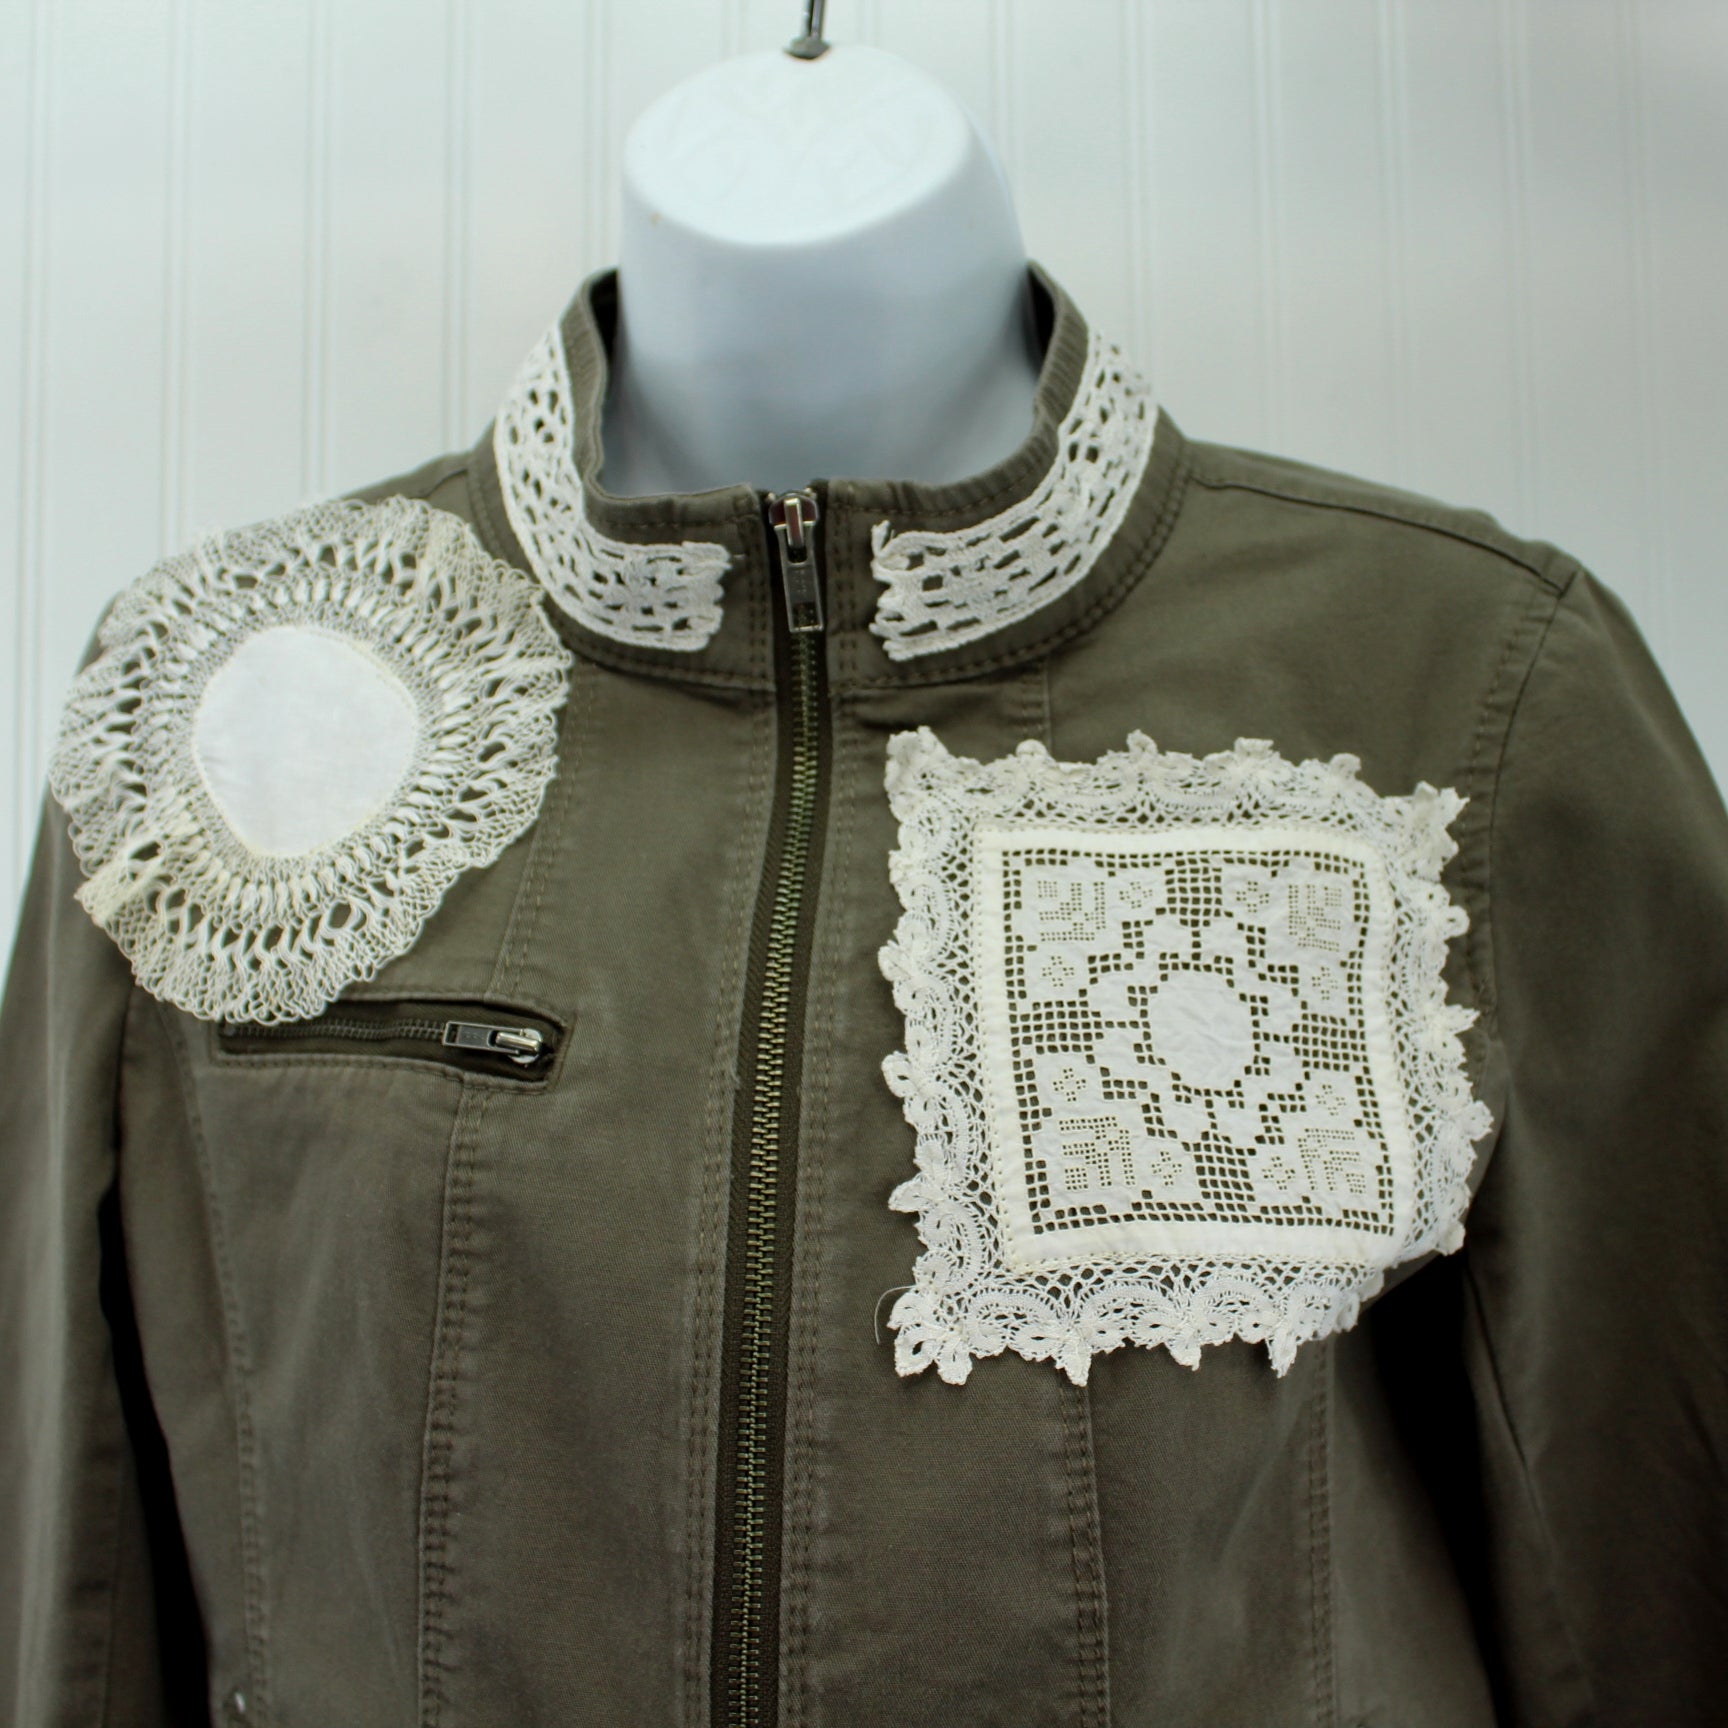 Express Cotton Jacket Mandarin Collar Enhanced Patzi Design Lace Doily Repurposed front closeup of lace and doilies 